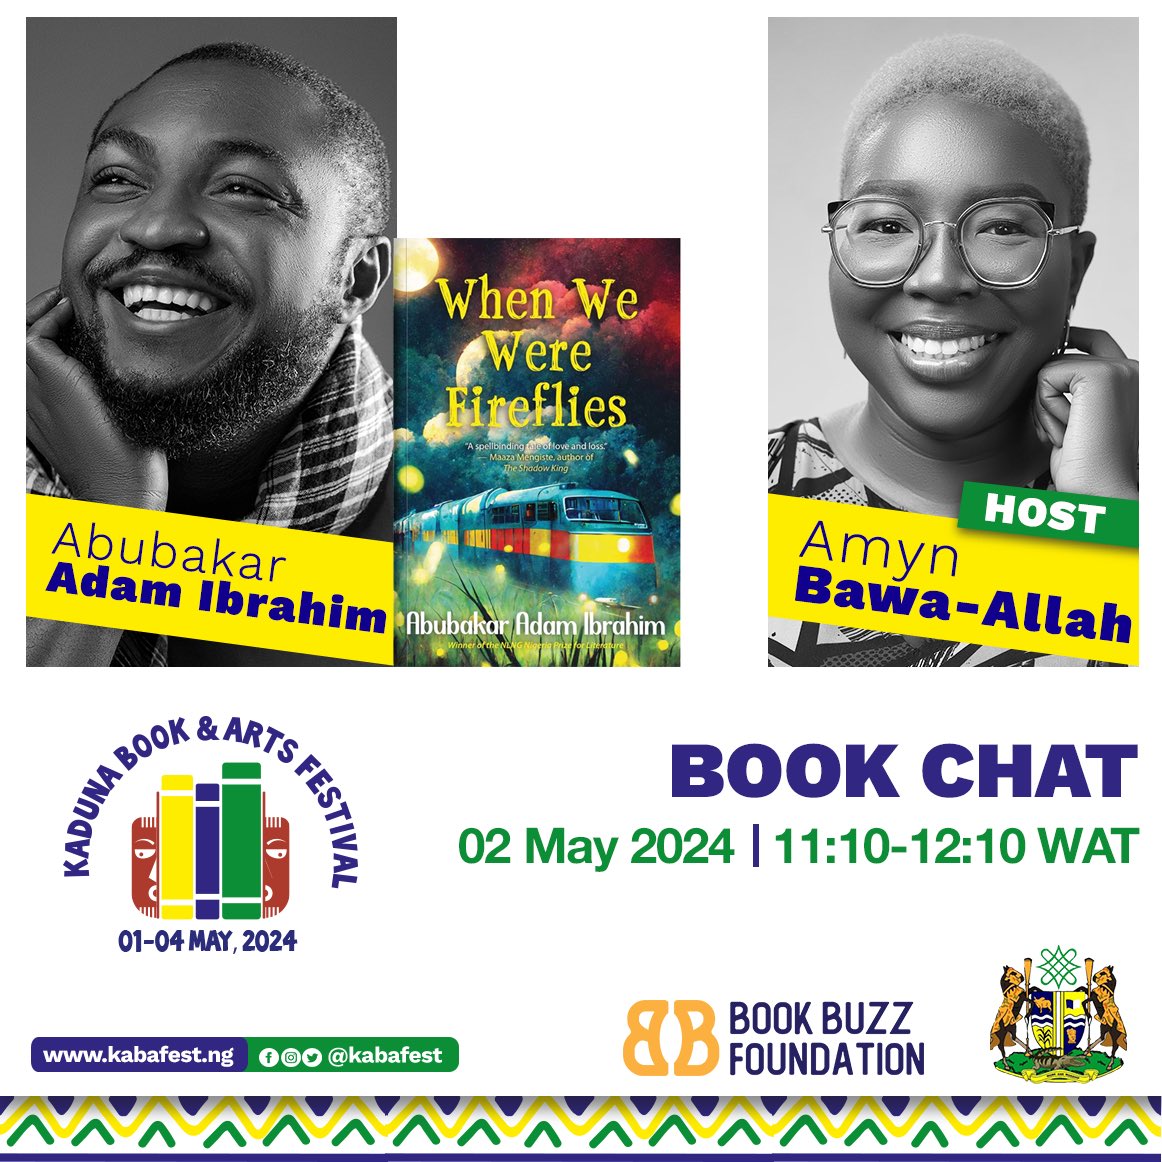 Happening Now: Book Chat with author @Abbakar_himself moderated by @LipglossMAFFIA Watch live on youtube here 👇 youtube.com/live/9-ceSHlcv… #Kabafest #Kabafest24